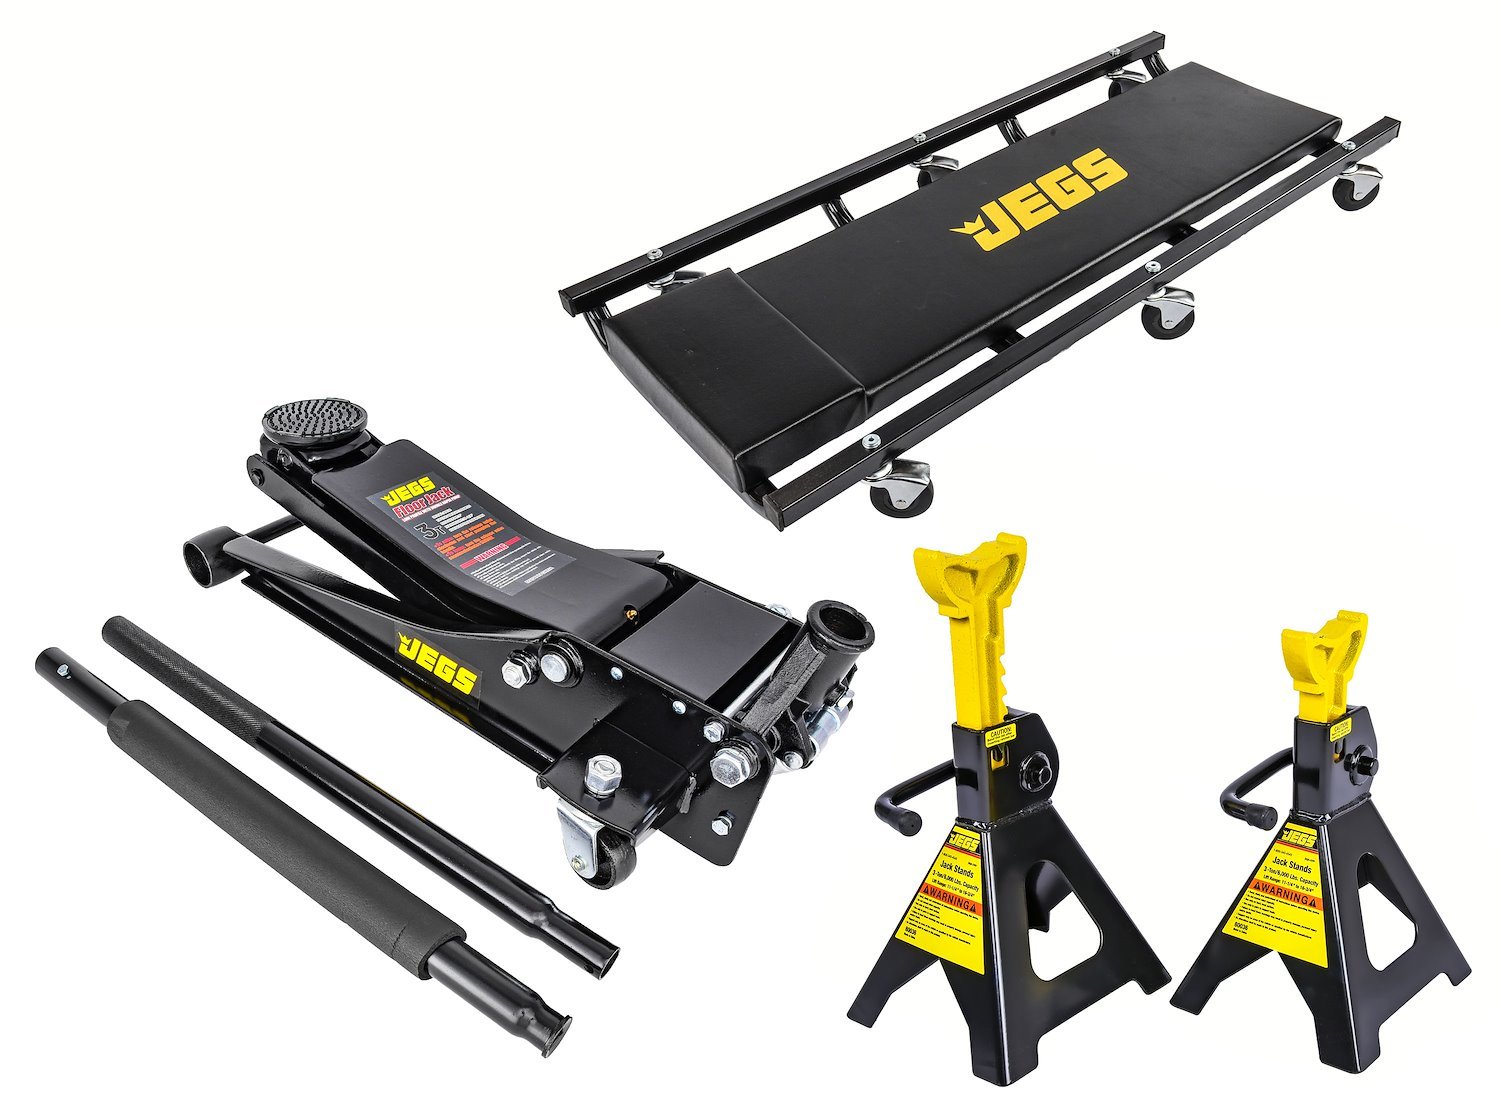 3-Ton Low-Profile Professional Floor Jack Kit with 3-Ton Capacity Jack Stands and Lo Boy Creeper